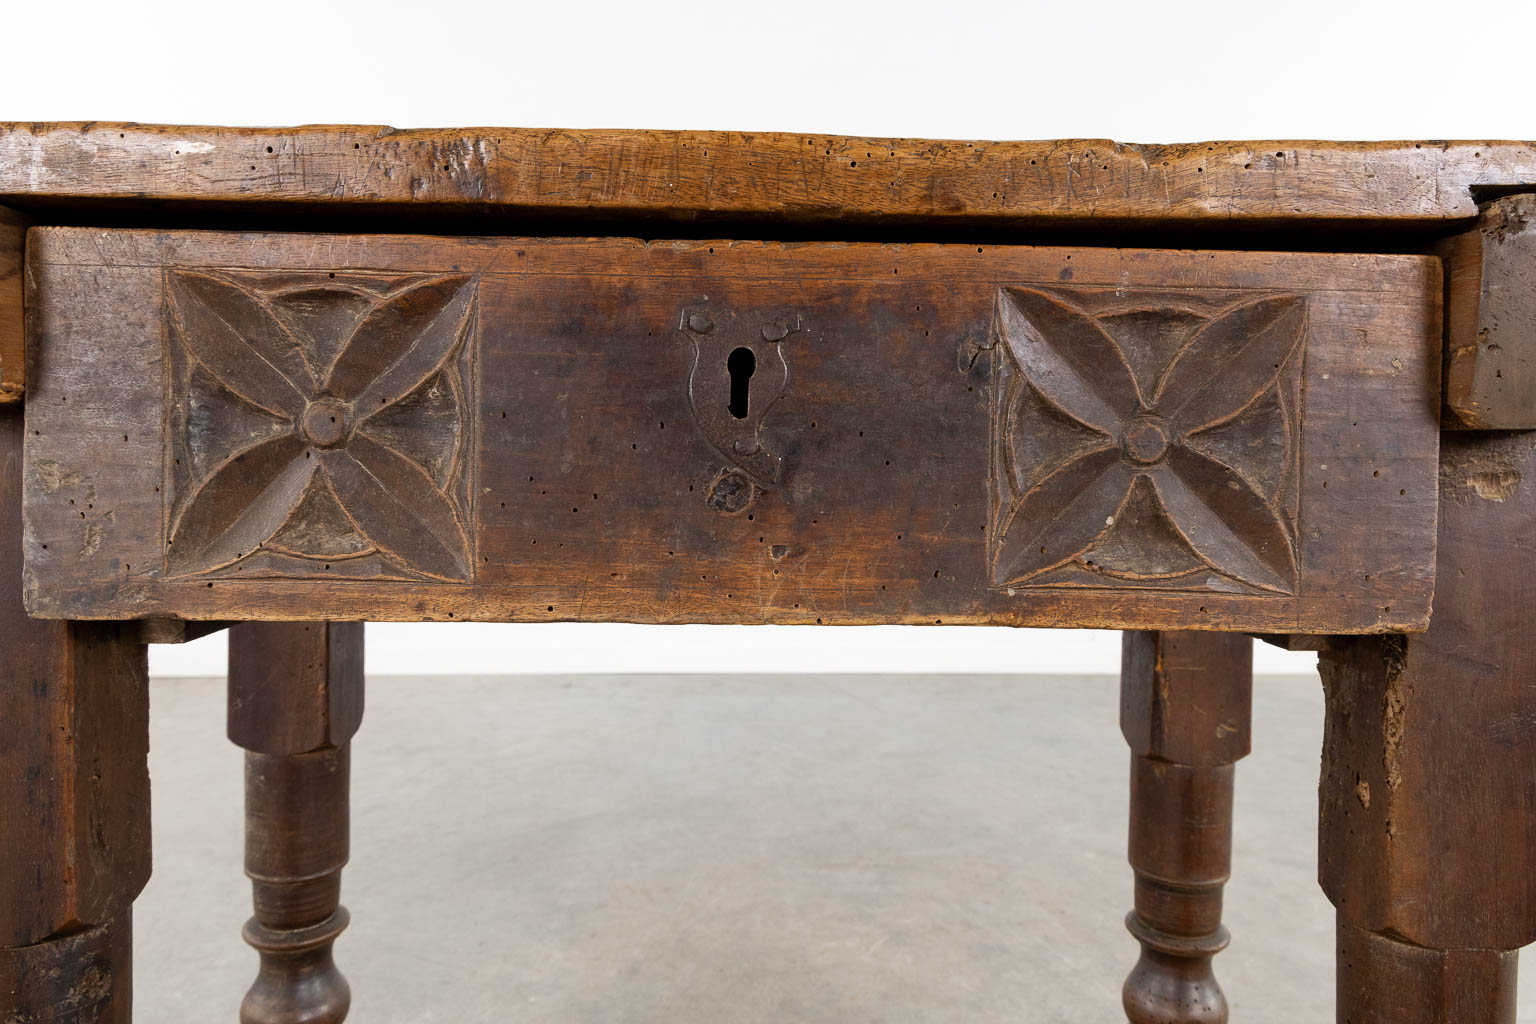 An antique side table, sculptured wood. (L:46 x W:97 x H:76 cm) - Image 11 of 14